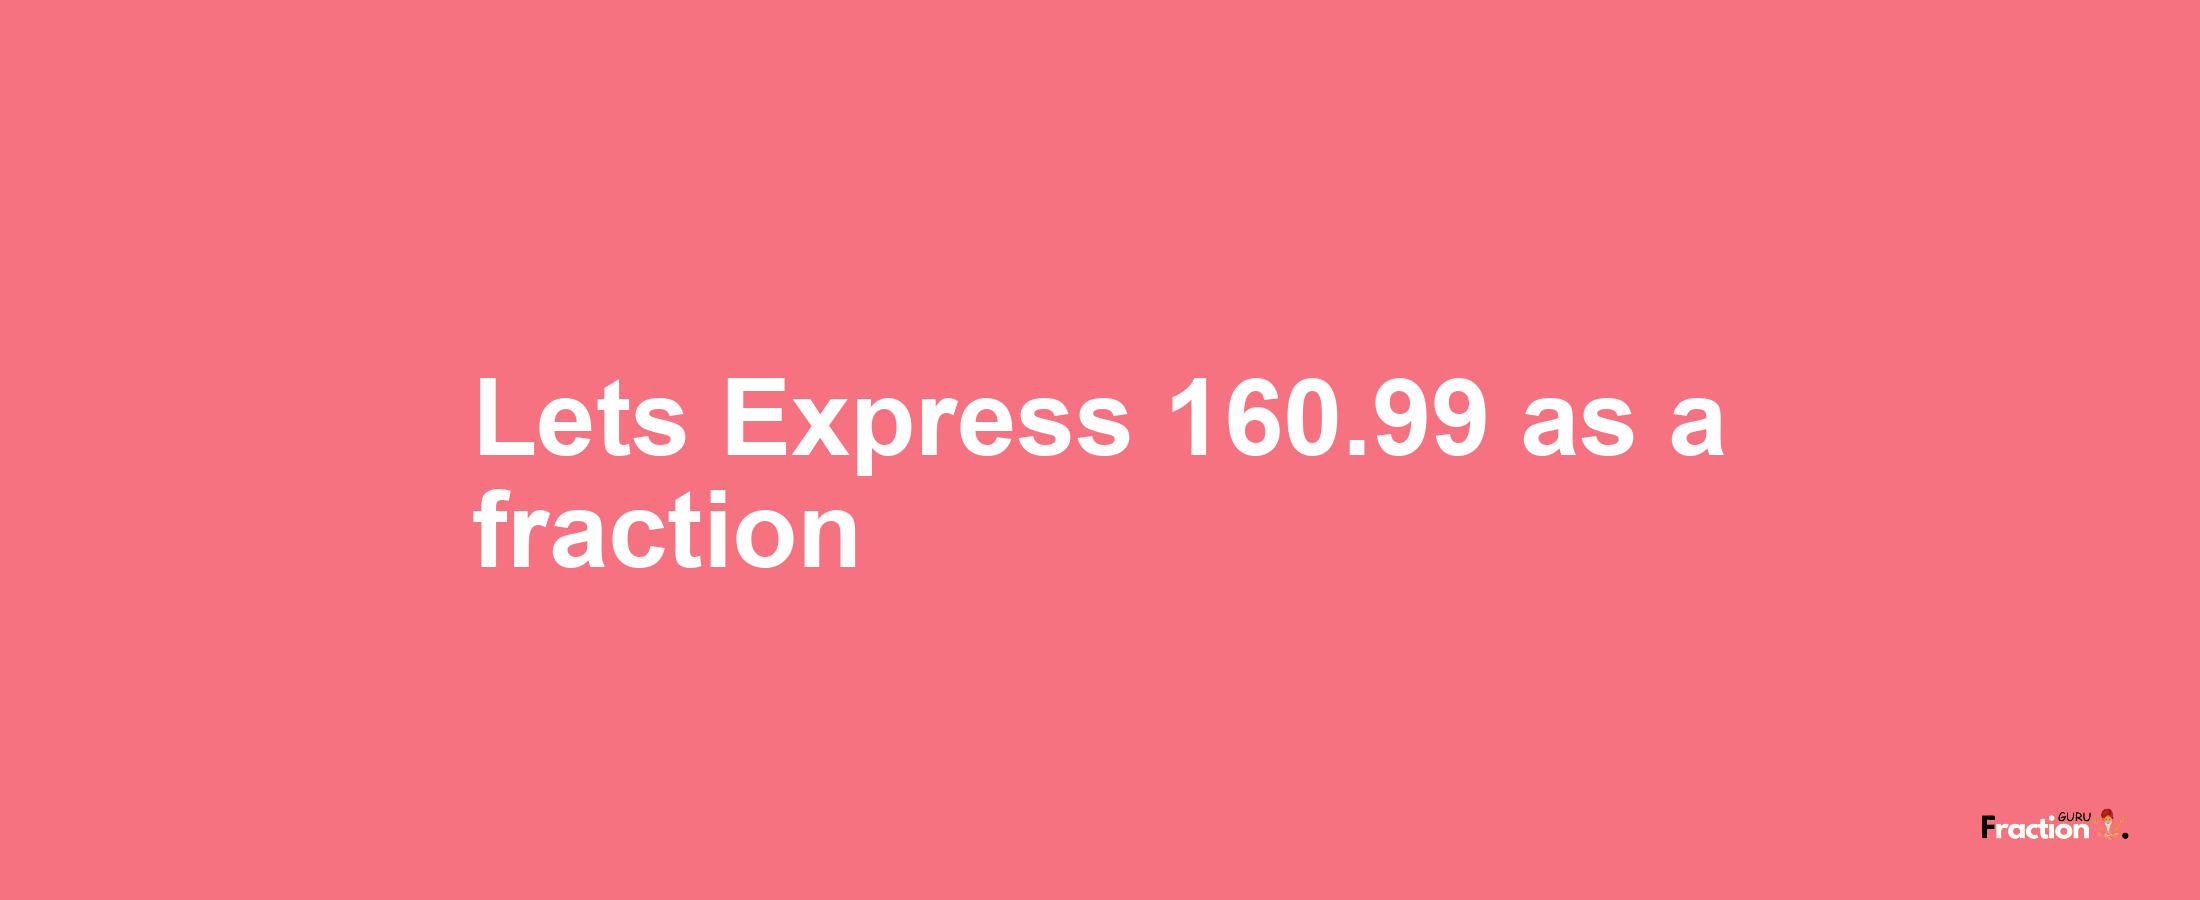 Lets Express 160.99 as afraction